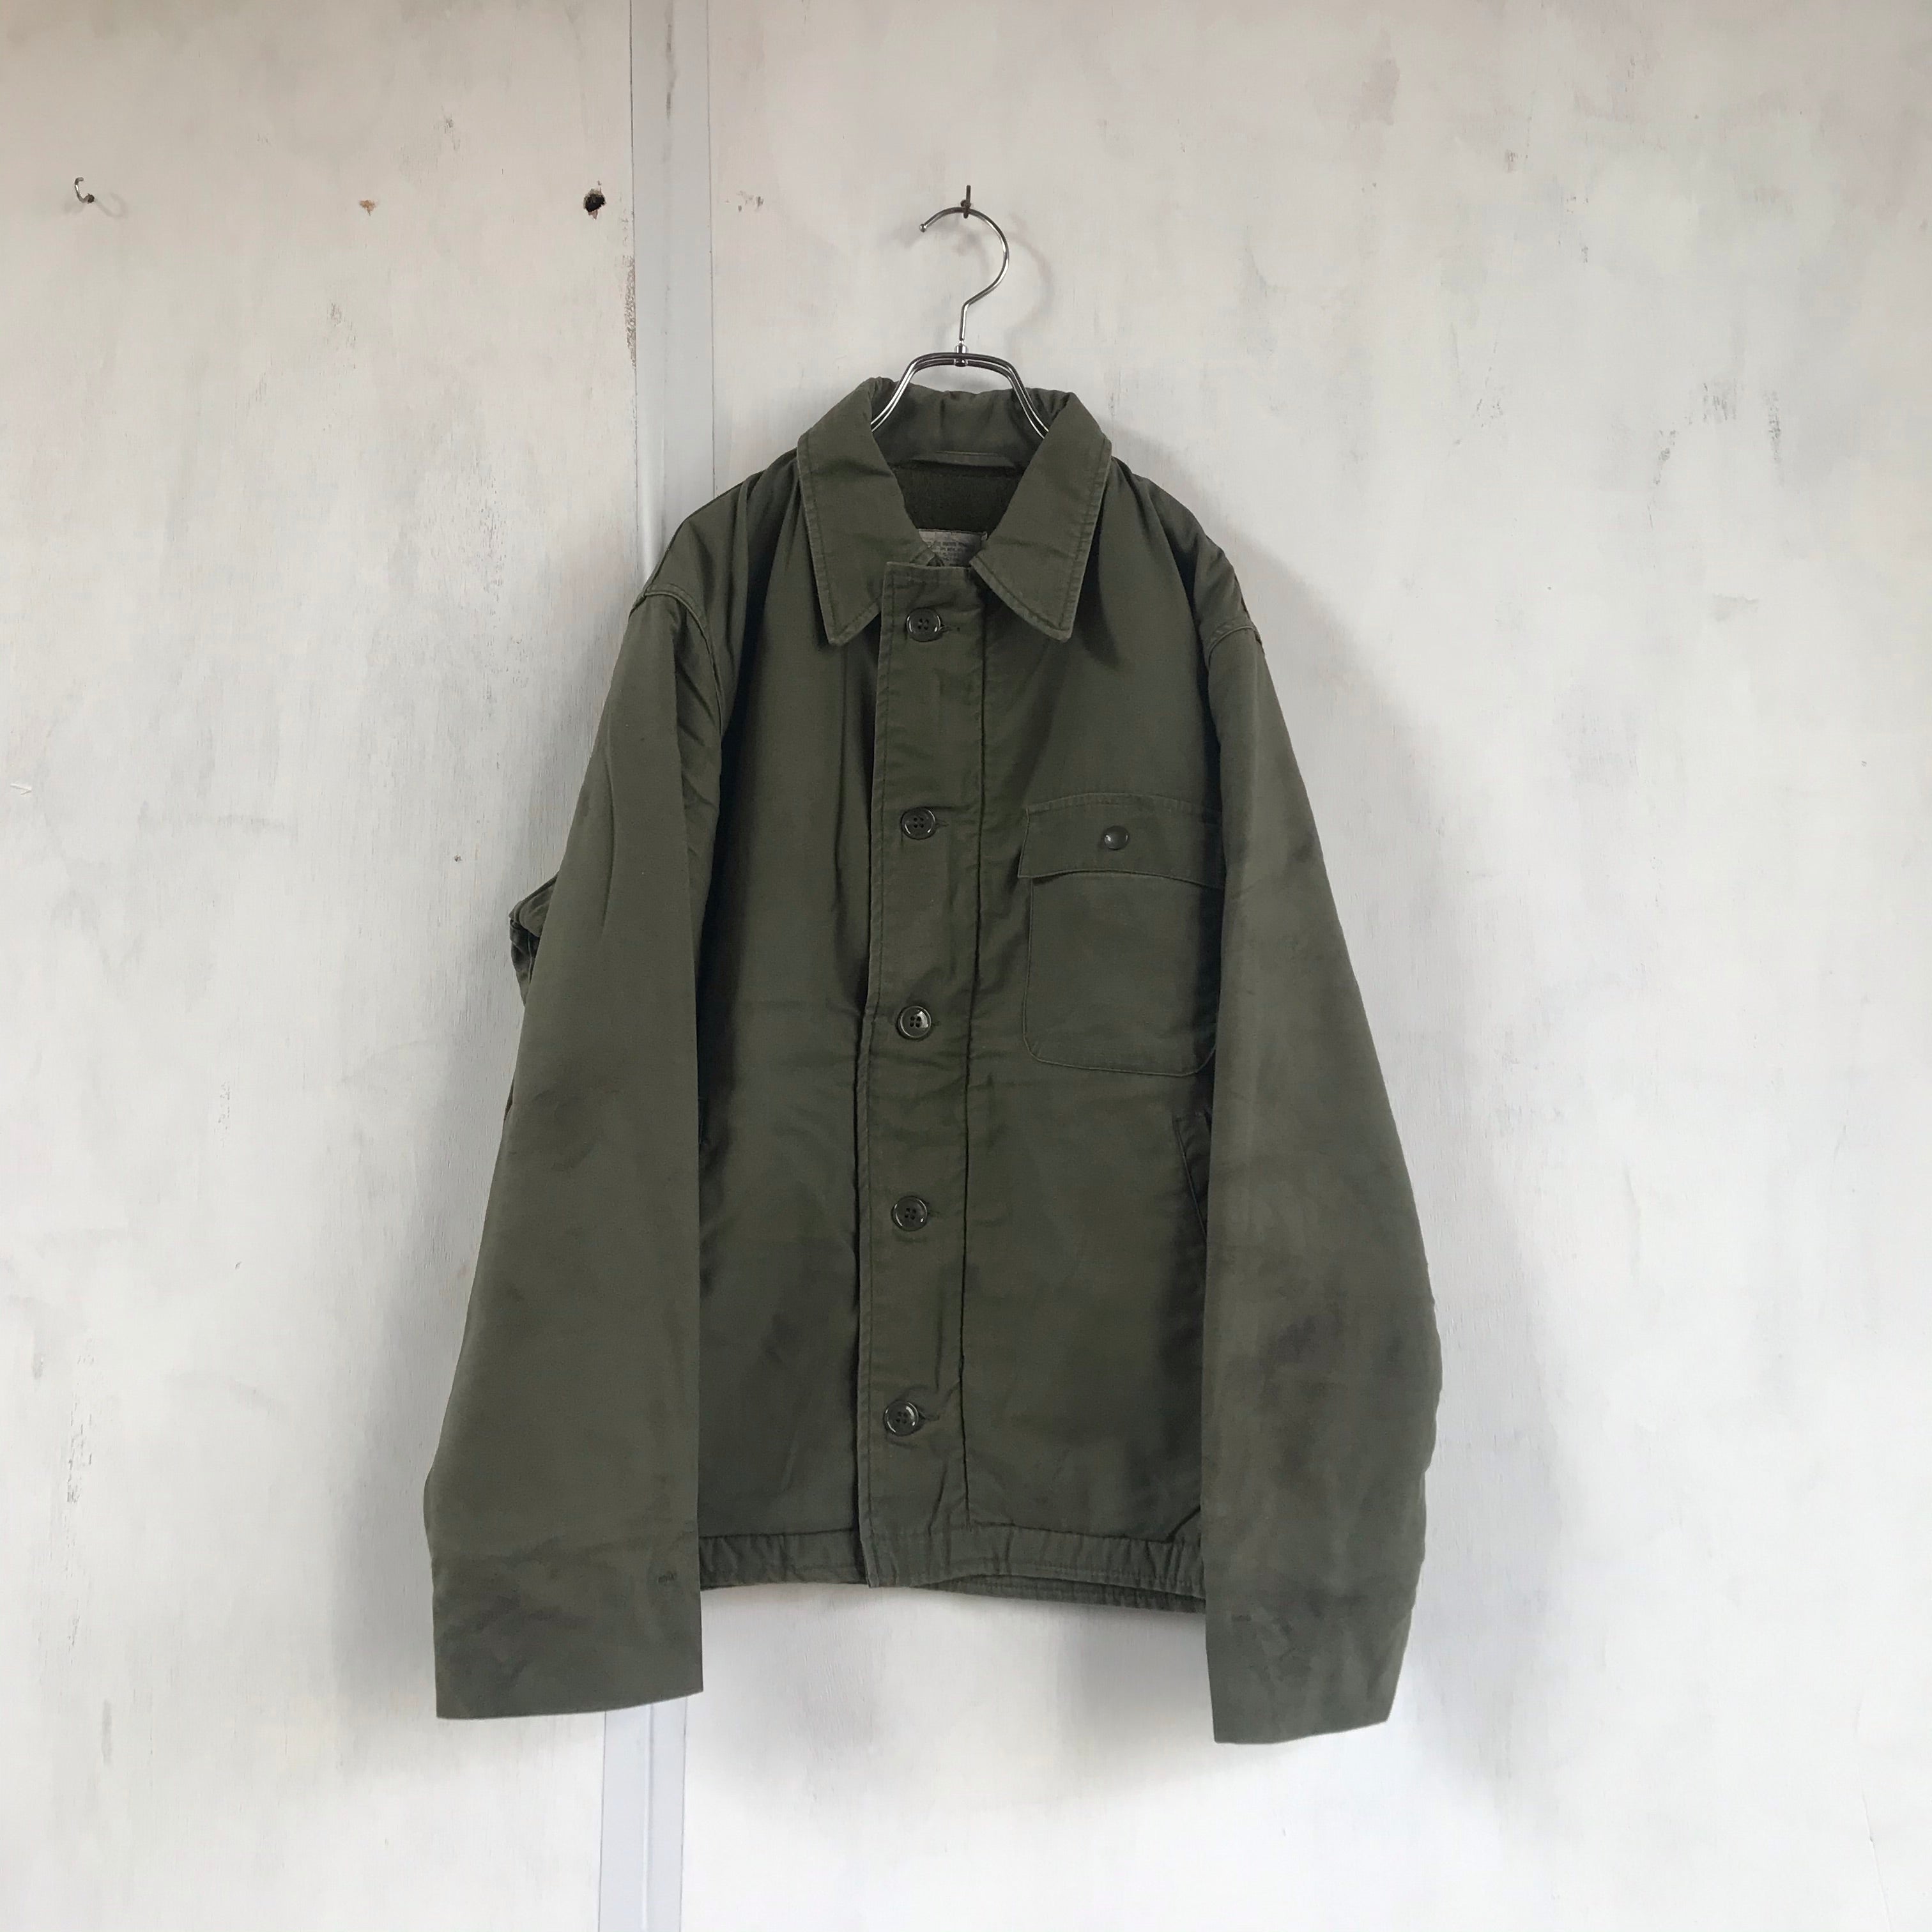 [ ONLY ONE ! ] U. S. NAVY 83's A-2 DECK JACKET / Mr.Clean Select